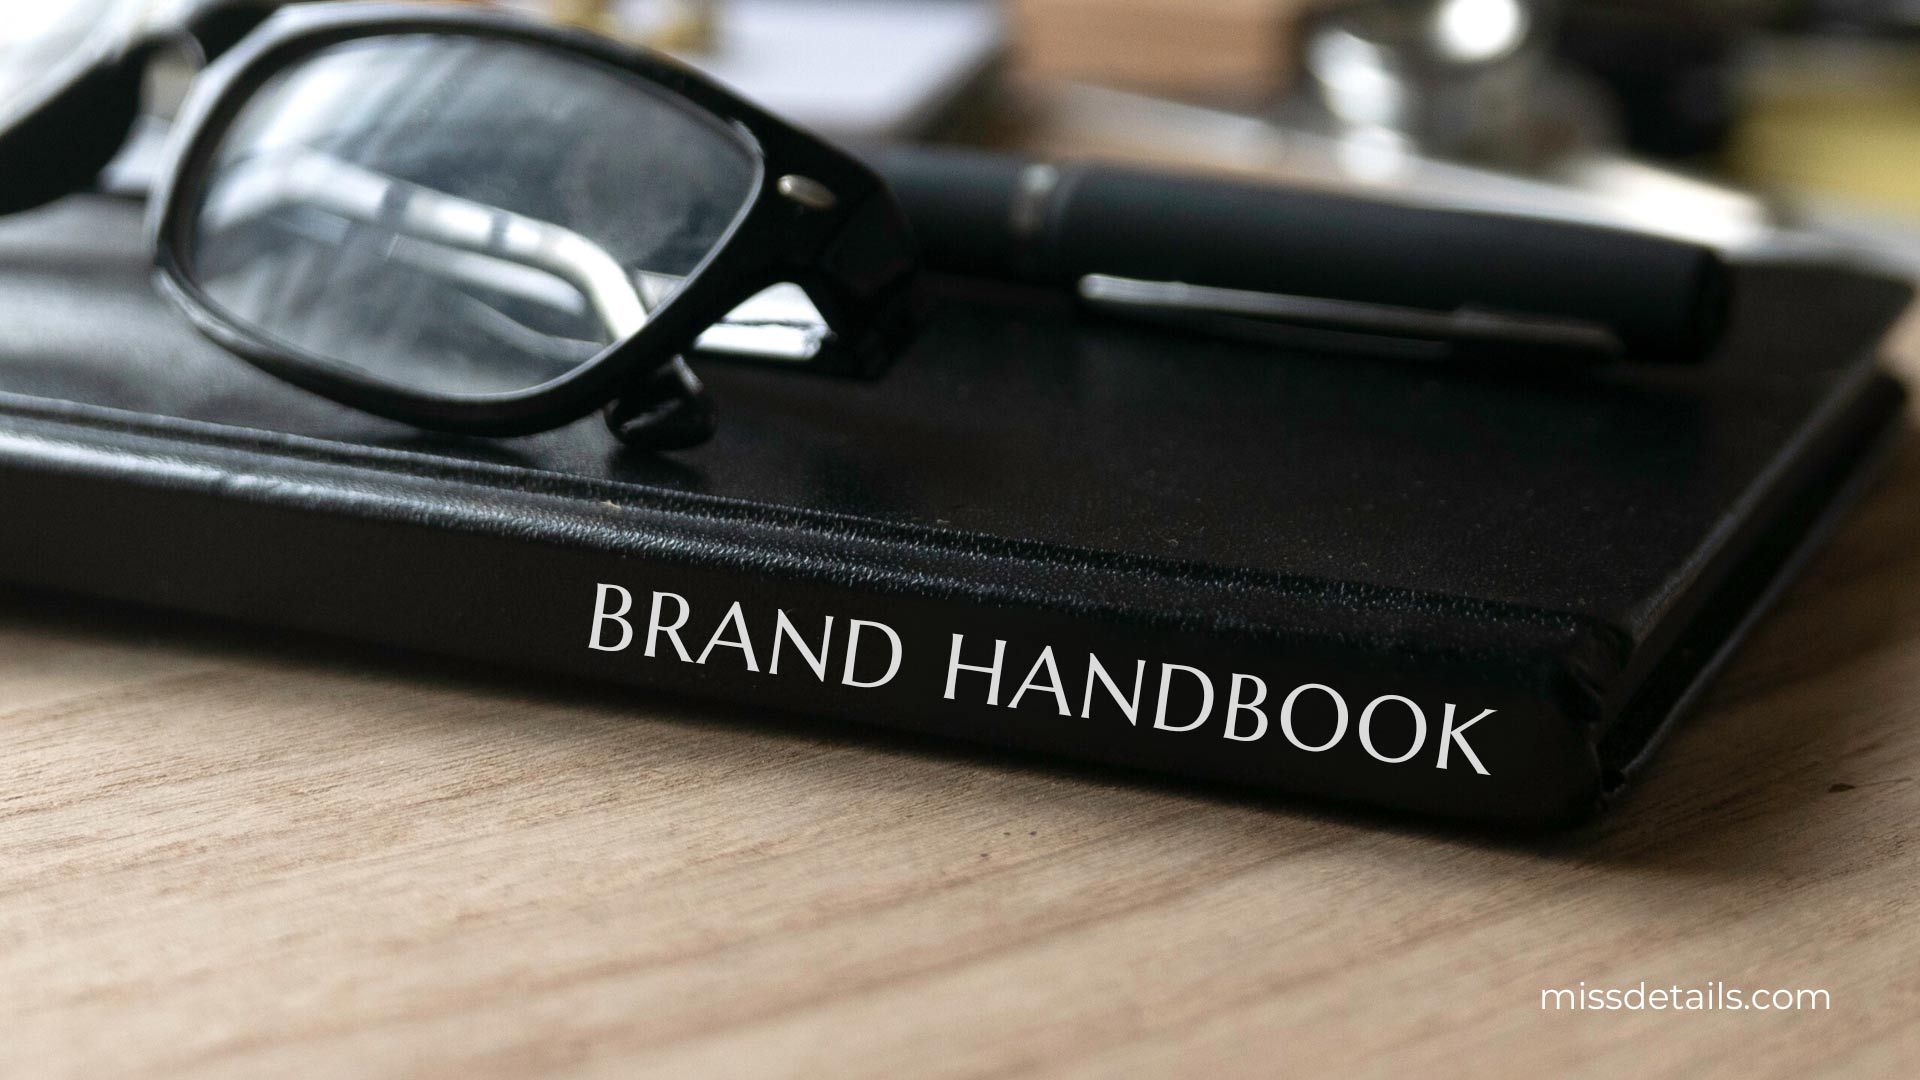 4 Best Practices for Using and Maintaining Your Brand Handbook